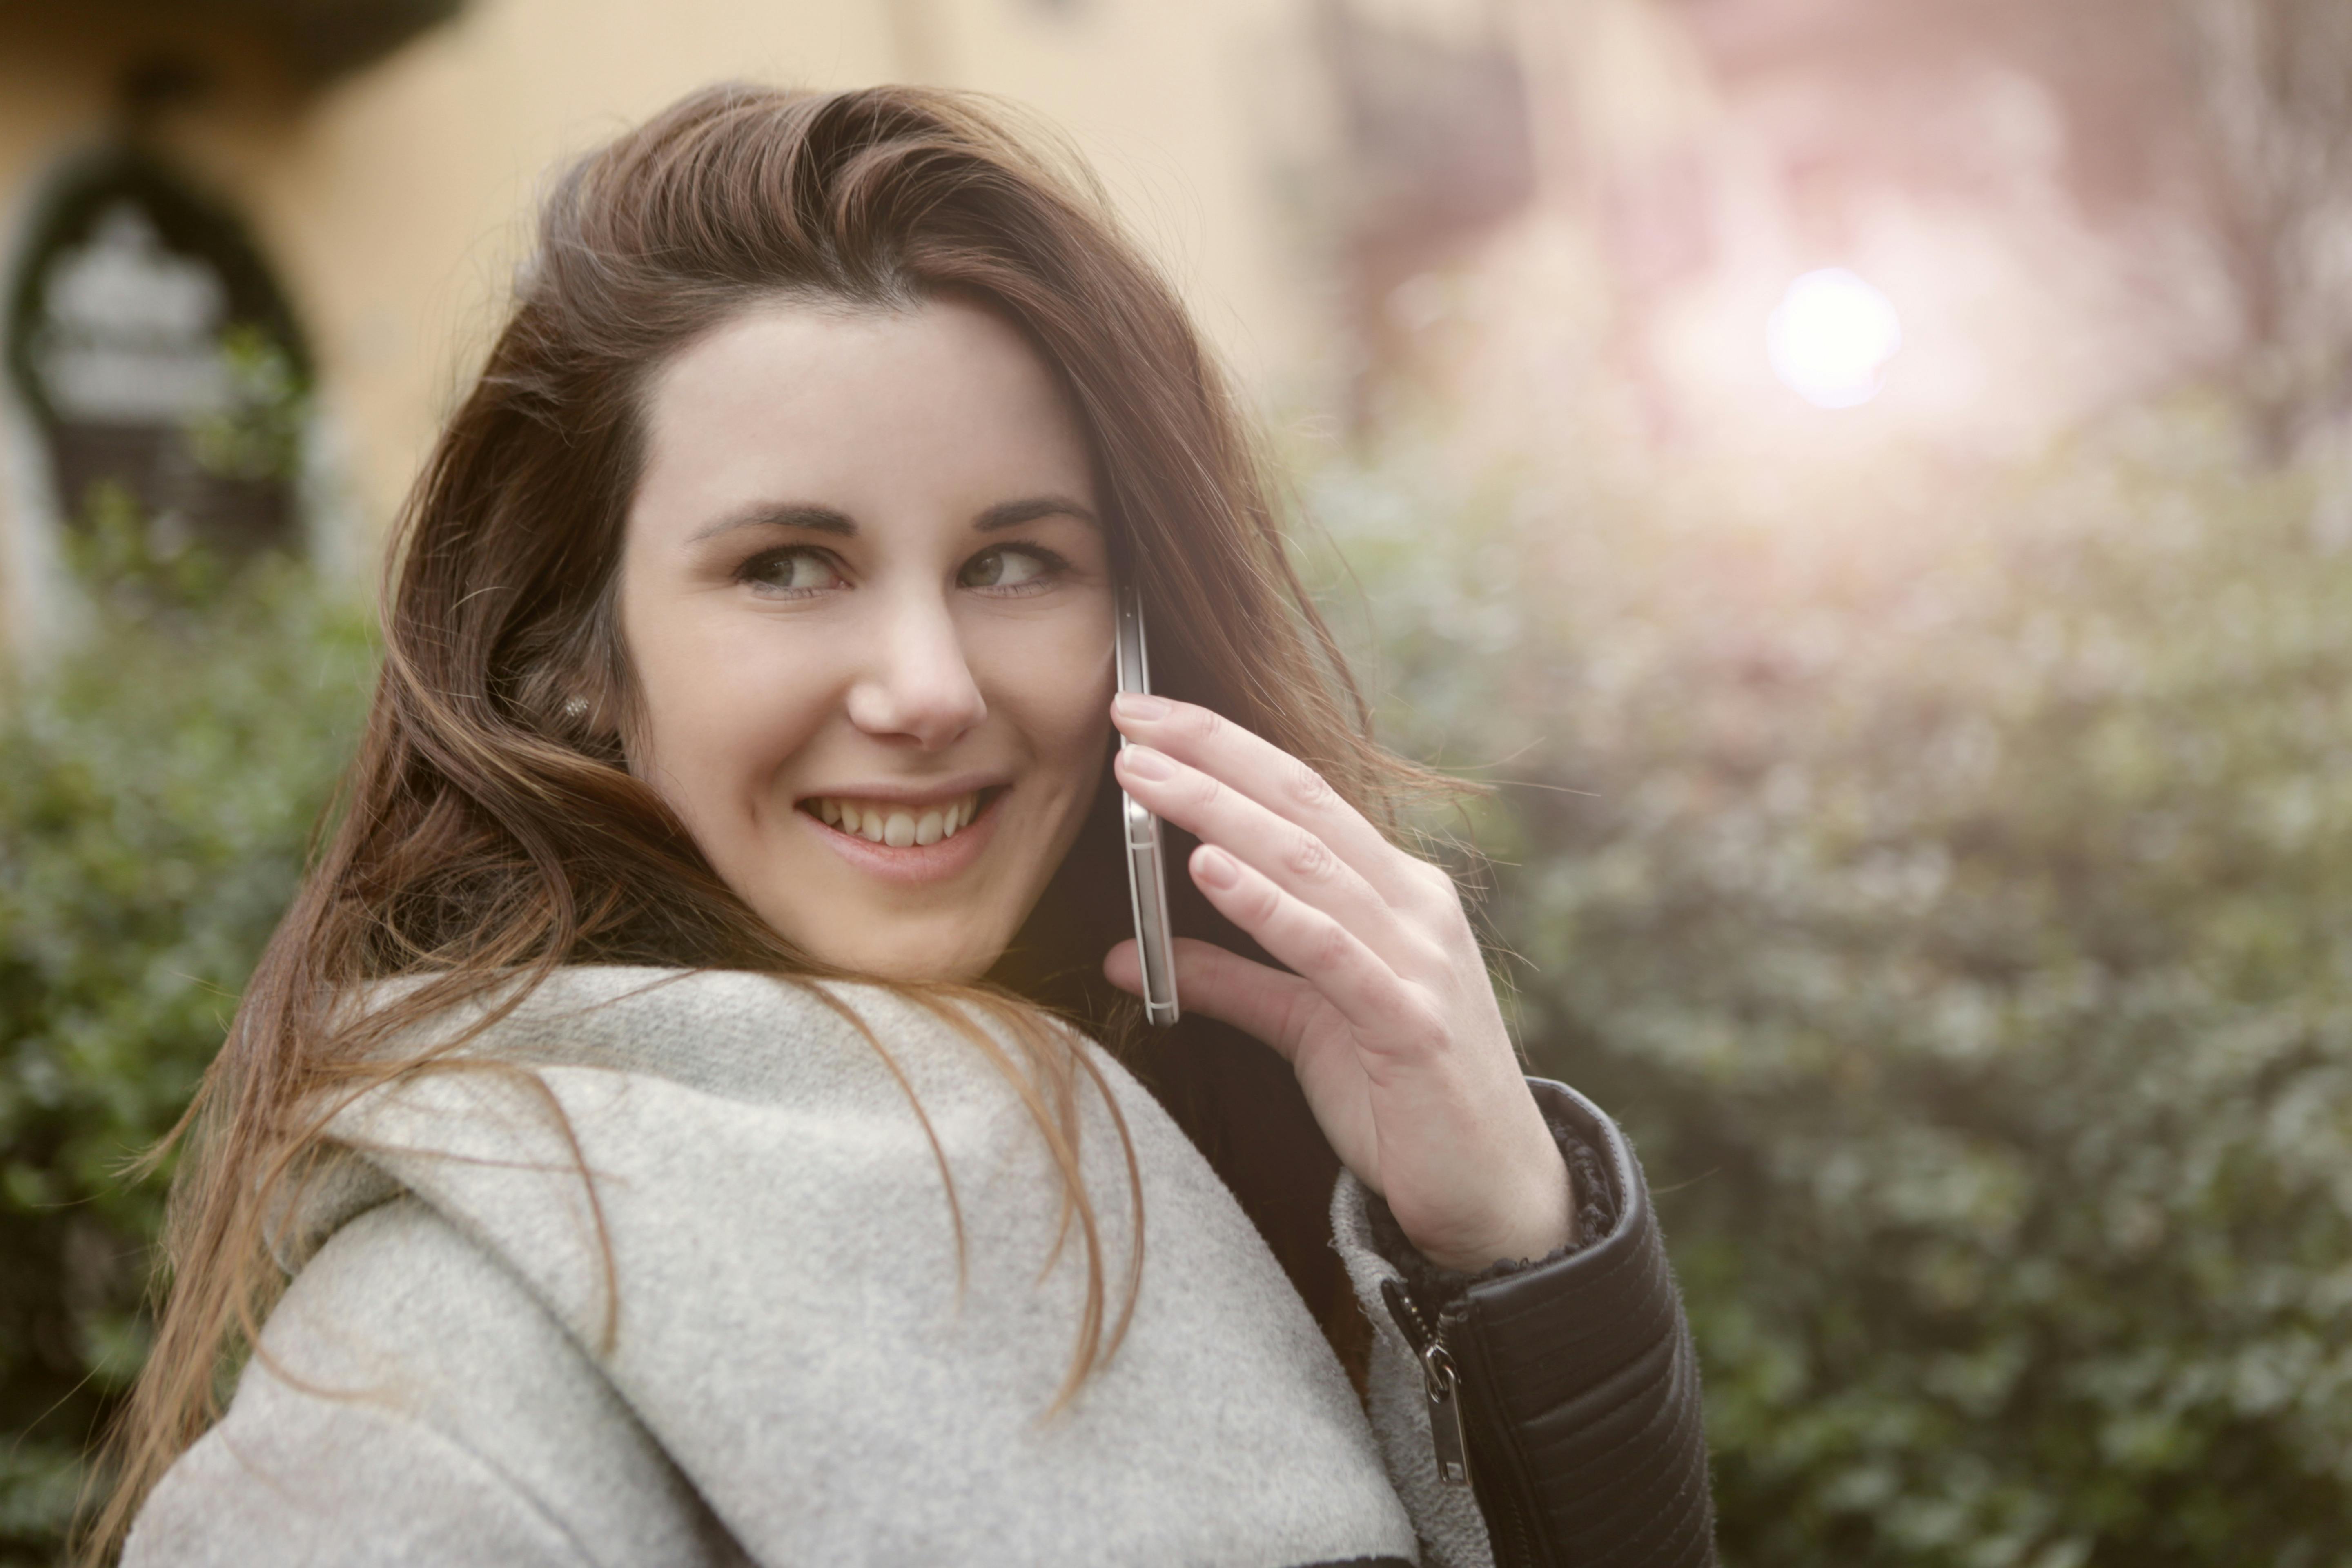 A happy woman speaking on the phone | Source: Pexels